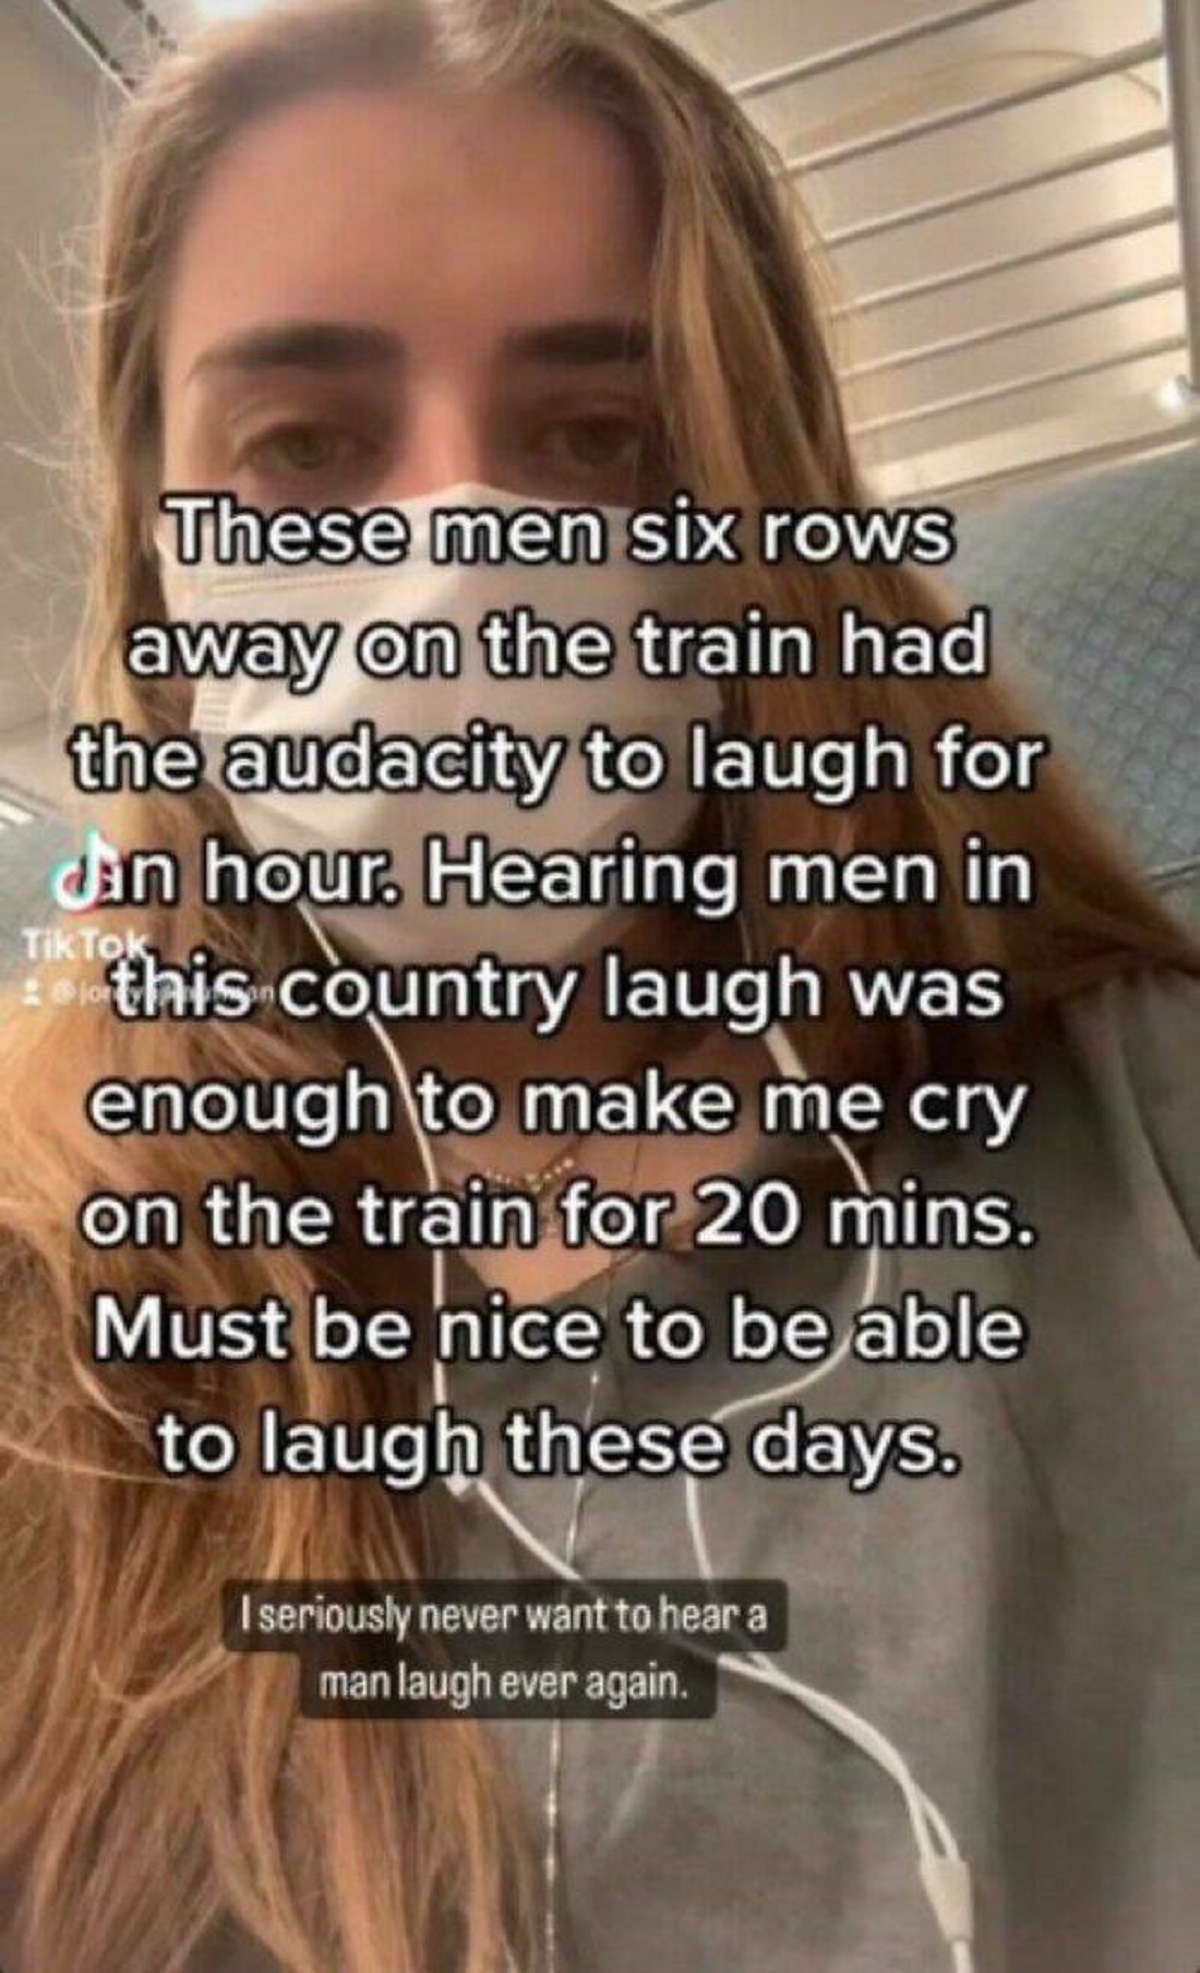 girl - These men six rows away on the train had the audacity to laugh for Jan hour. Hearing men in Tik Tok this country laugh was enough to make me cry on the train for 20 mins. Must be nice to be able to laugh these days. I seriously never want to hear a